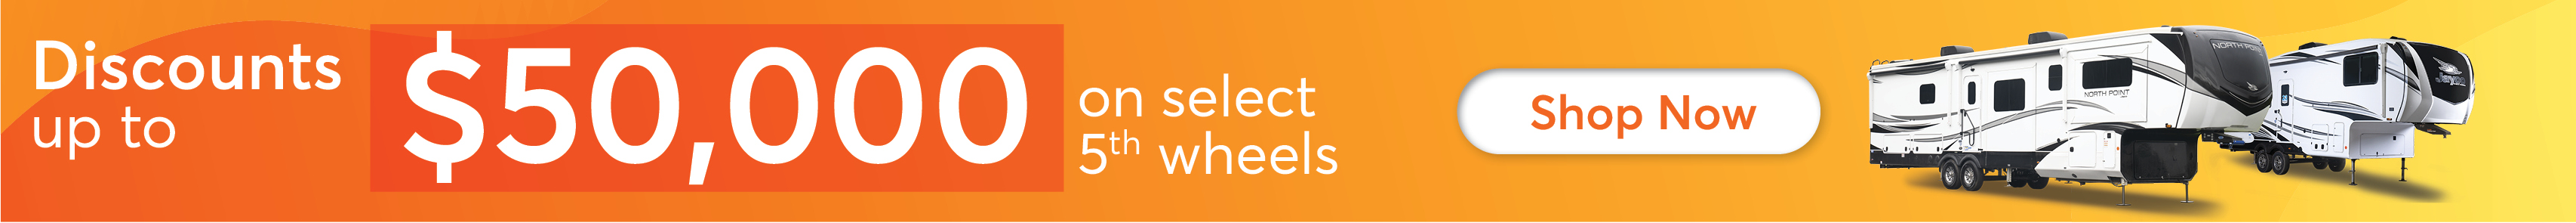 $50,000 Discount on 5th Wheels